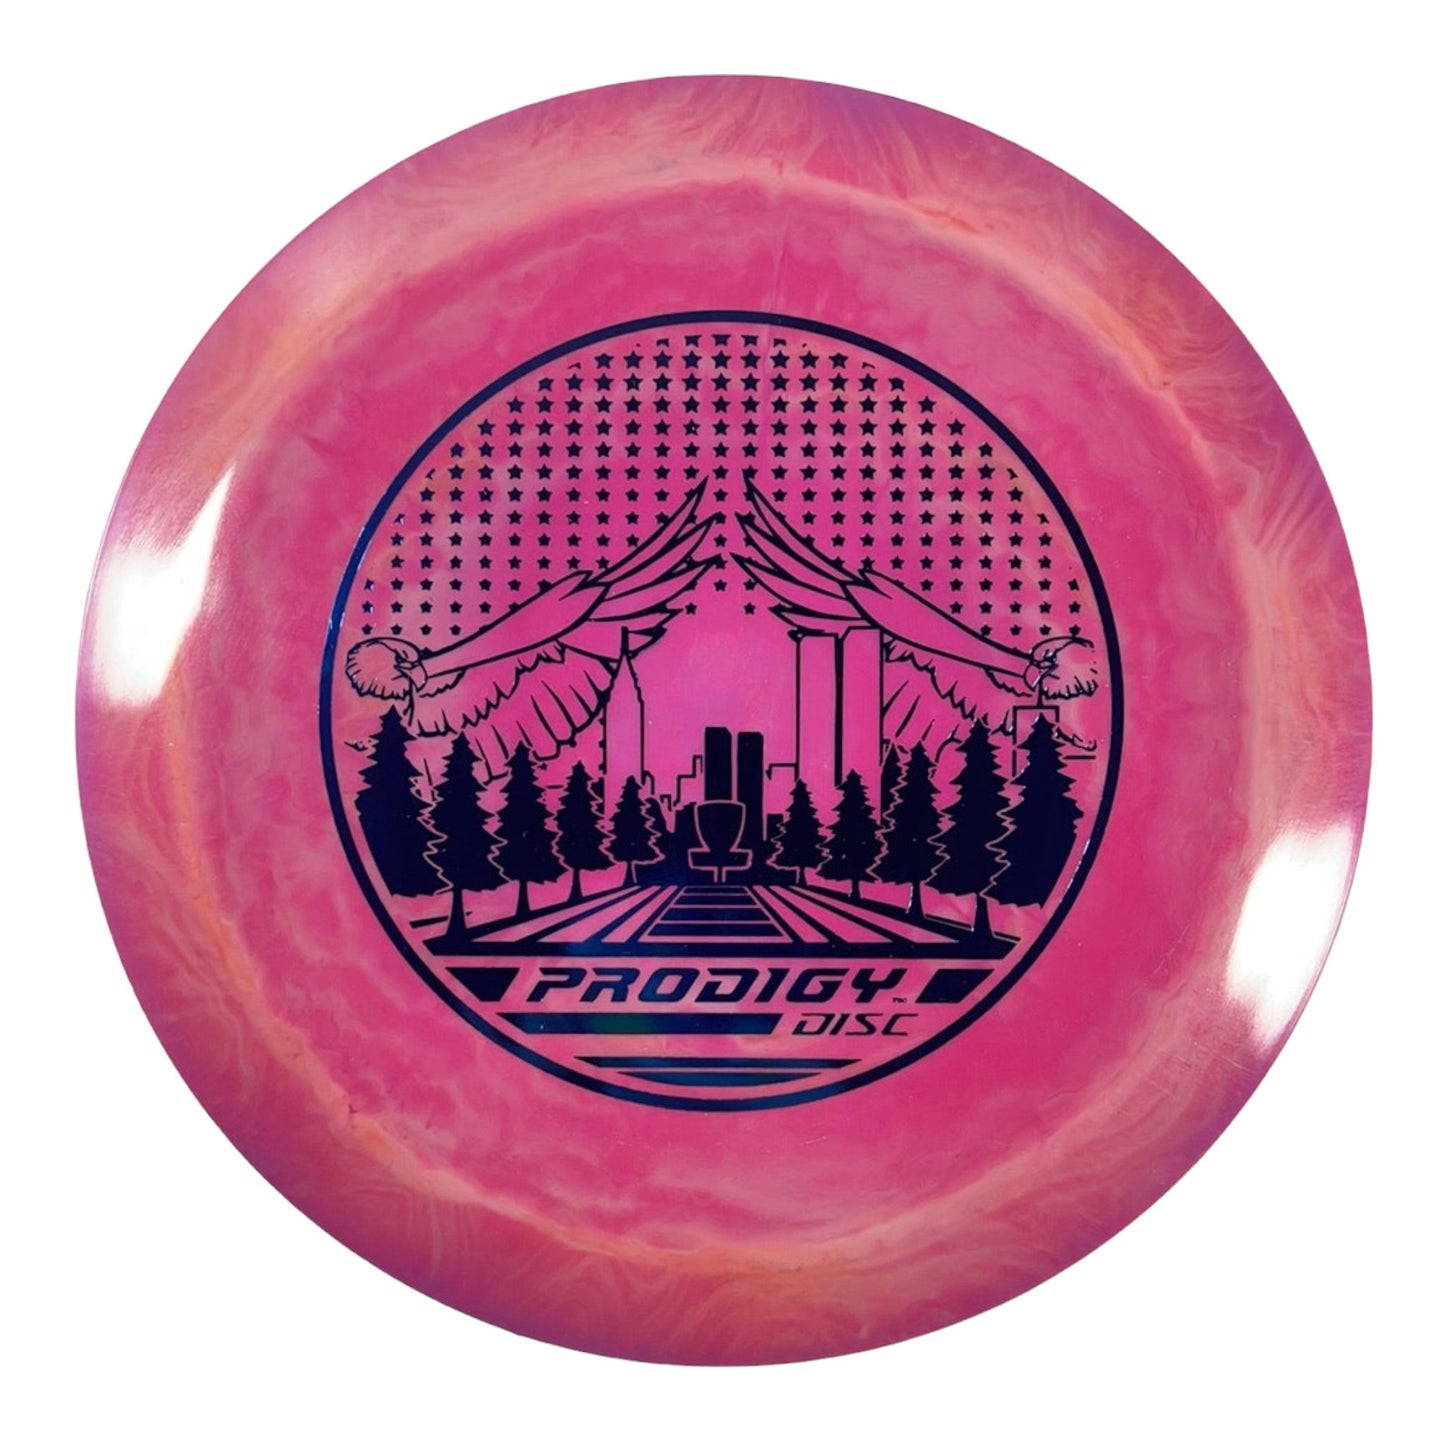 Prodigy Disc D2 | 500 Spectrum | Pink/Blue 174g (Tribute Stamp) Disc Golf